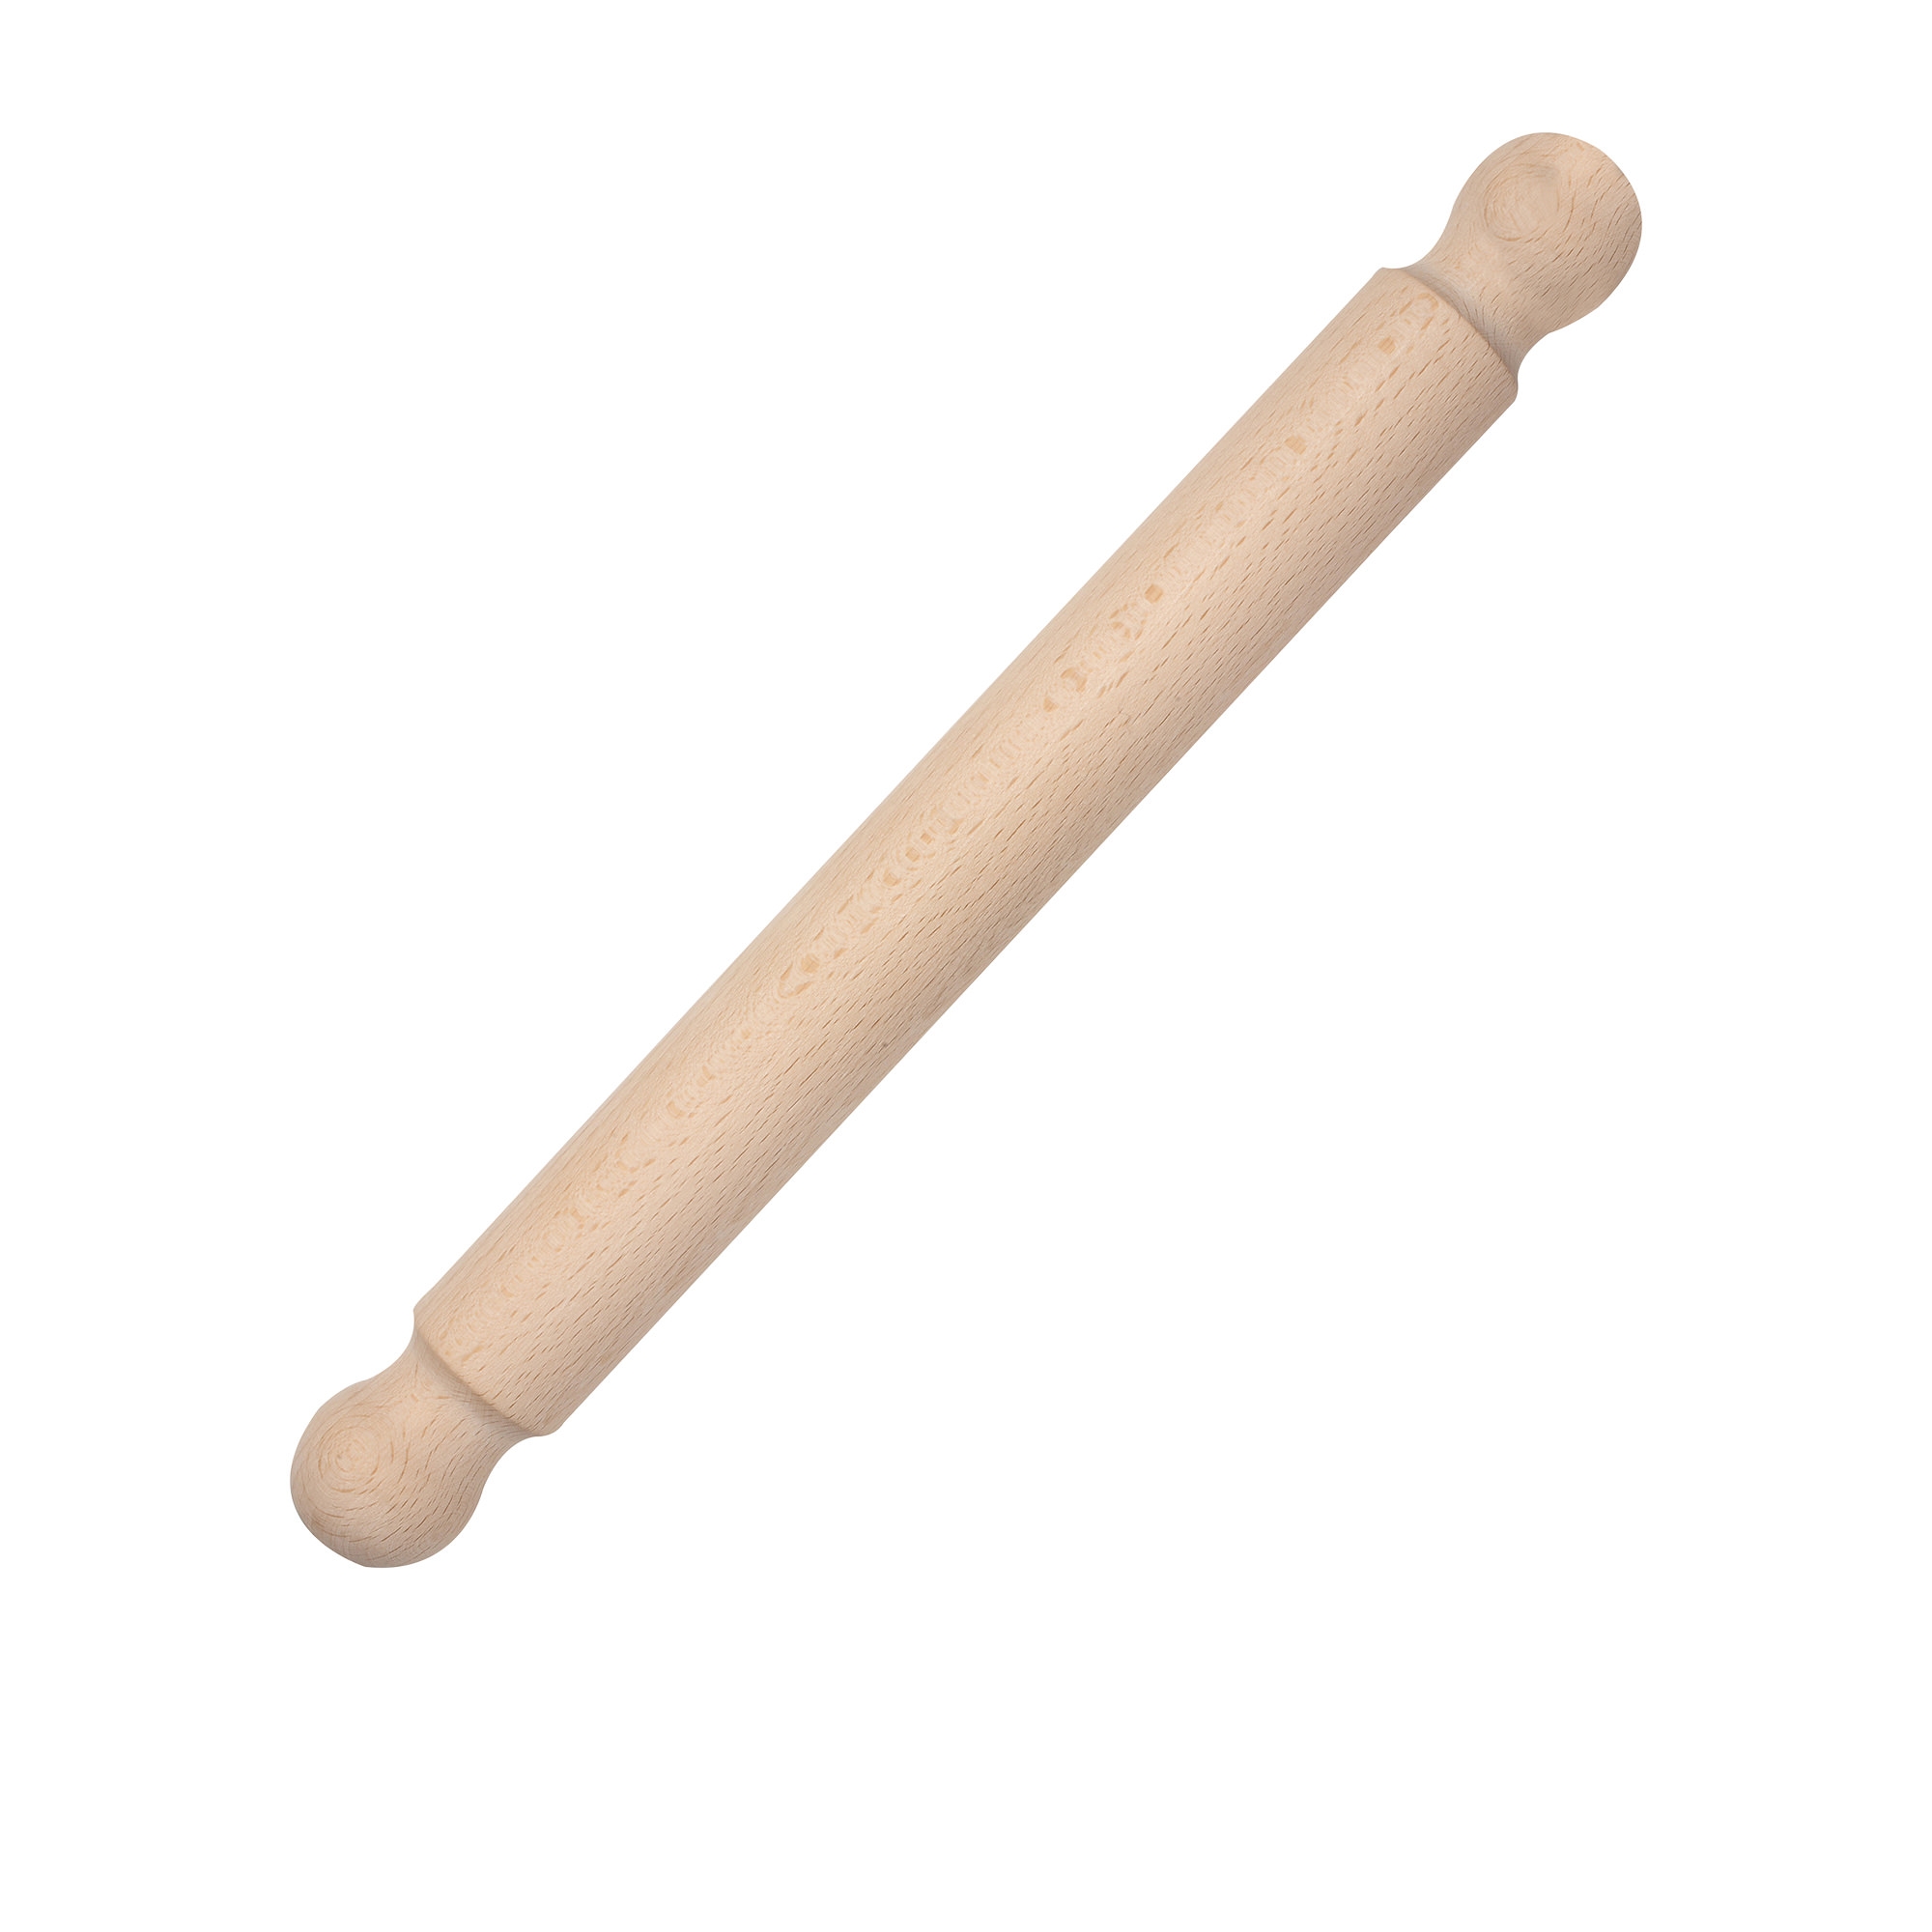 Wild Wood Wooden Rolling Pin 40cm Image 1